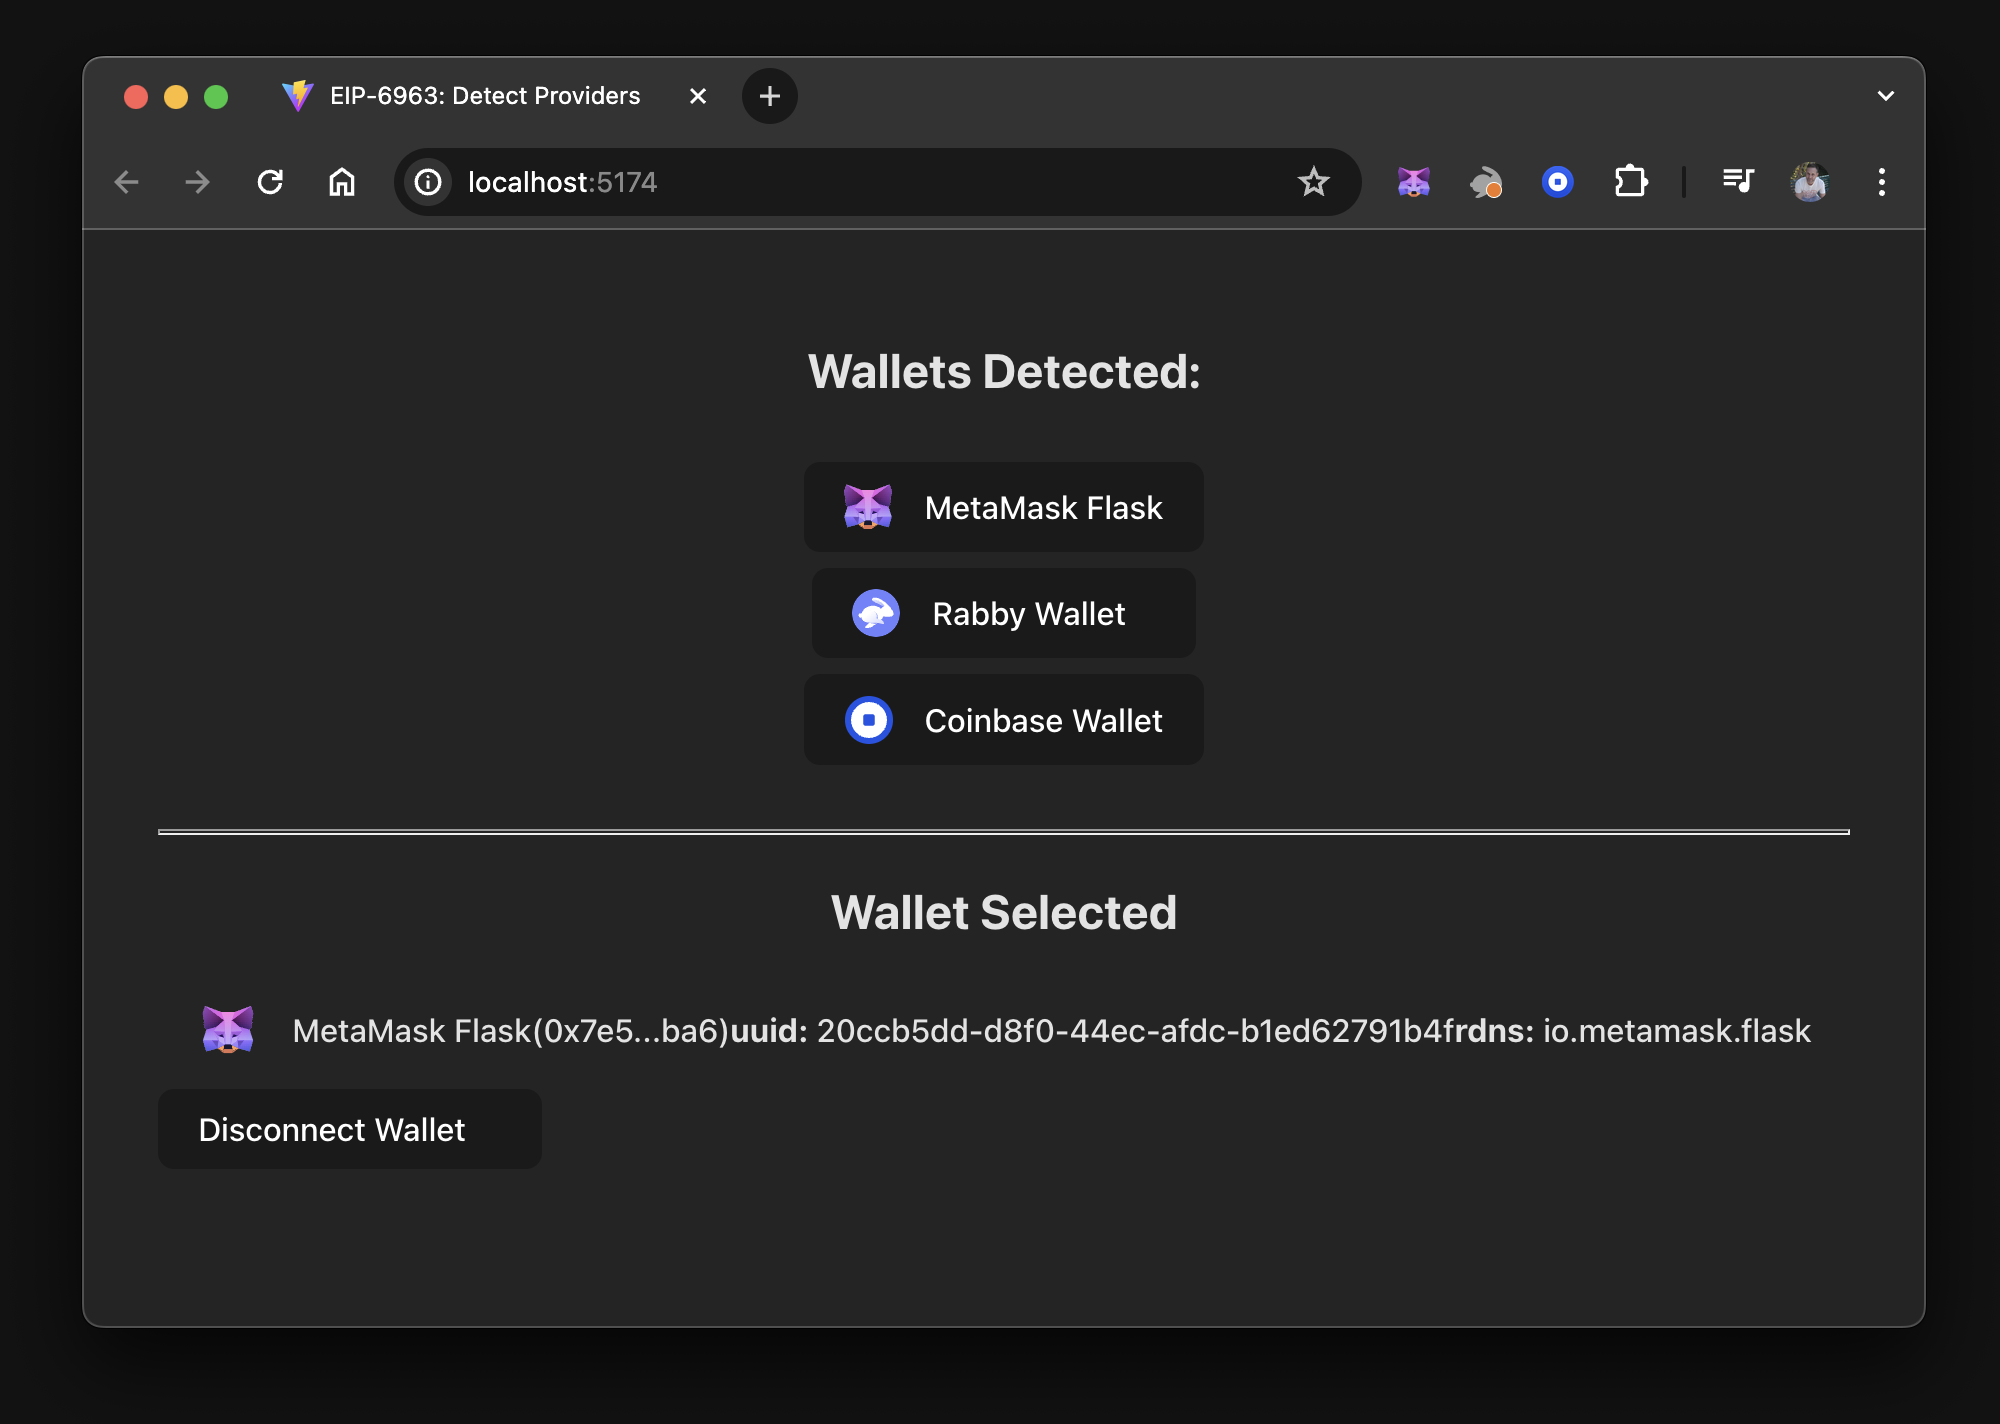 View of SelectedWallet component